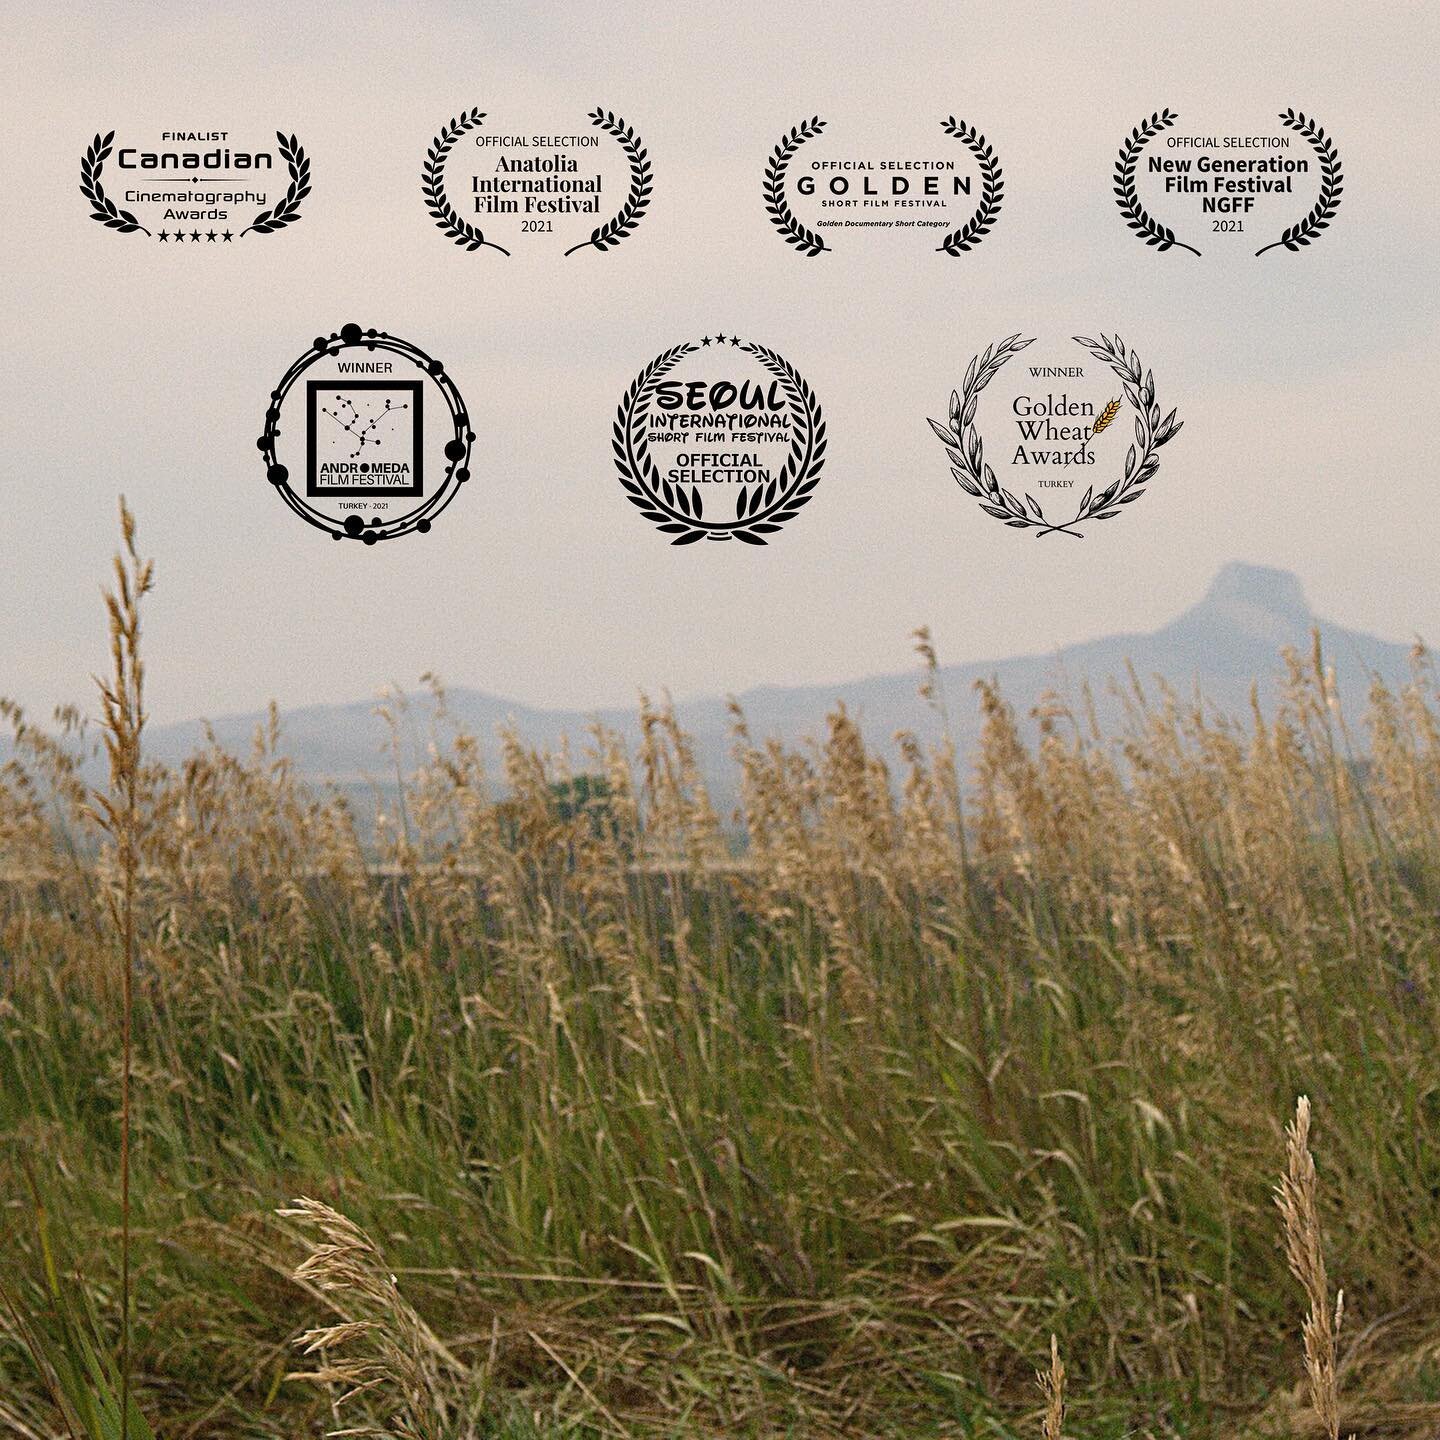 Grateful to all these festivals for choosing Fugetsu-Do to be a part of their programs! 👉 Best Documentary at @communityofcinema #goldenwheatawards 👉 Best Cinematography at Andromeda Film Festival 👉 Finalist for Best Short Film at @cineawards 👉 O